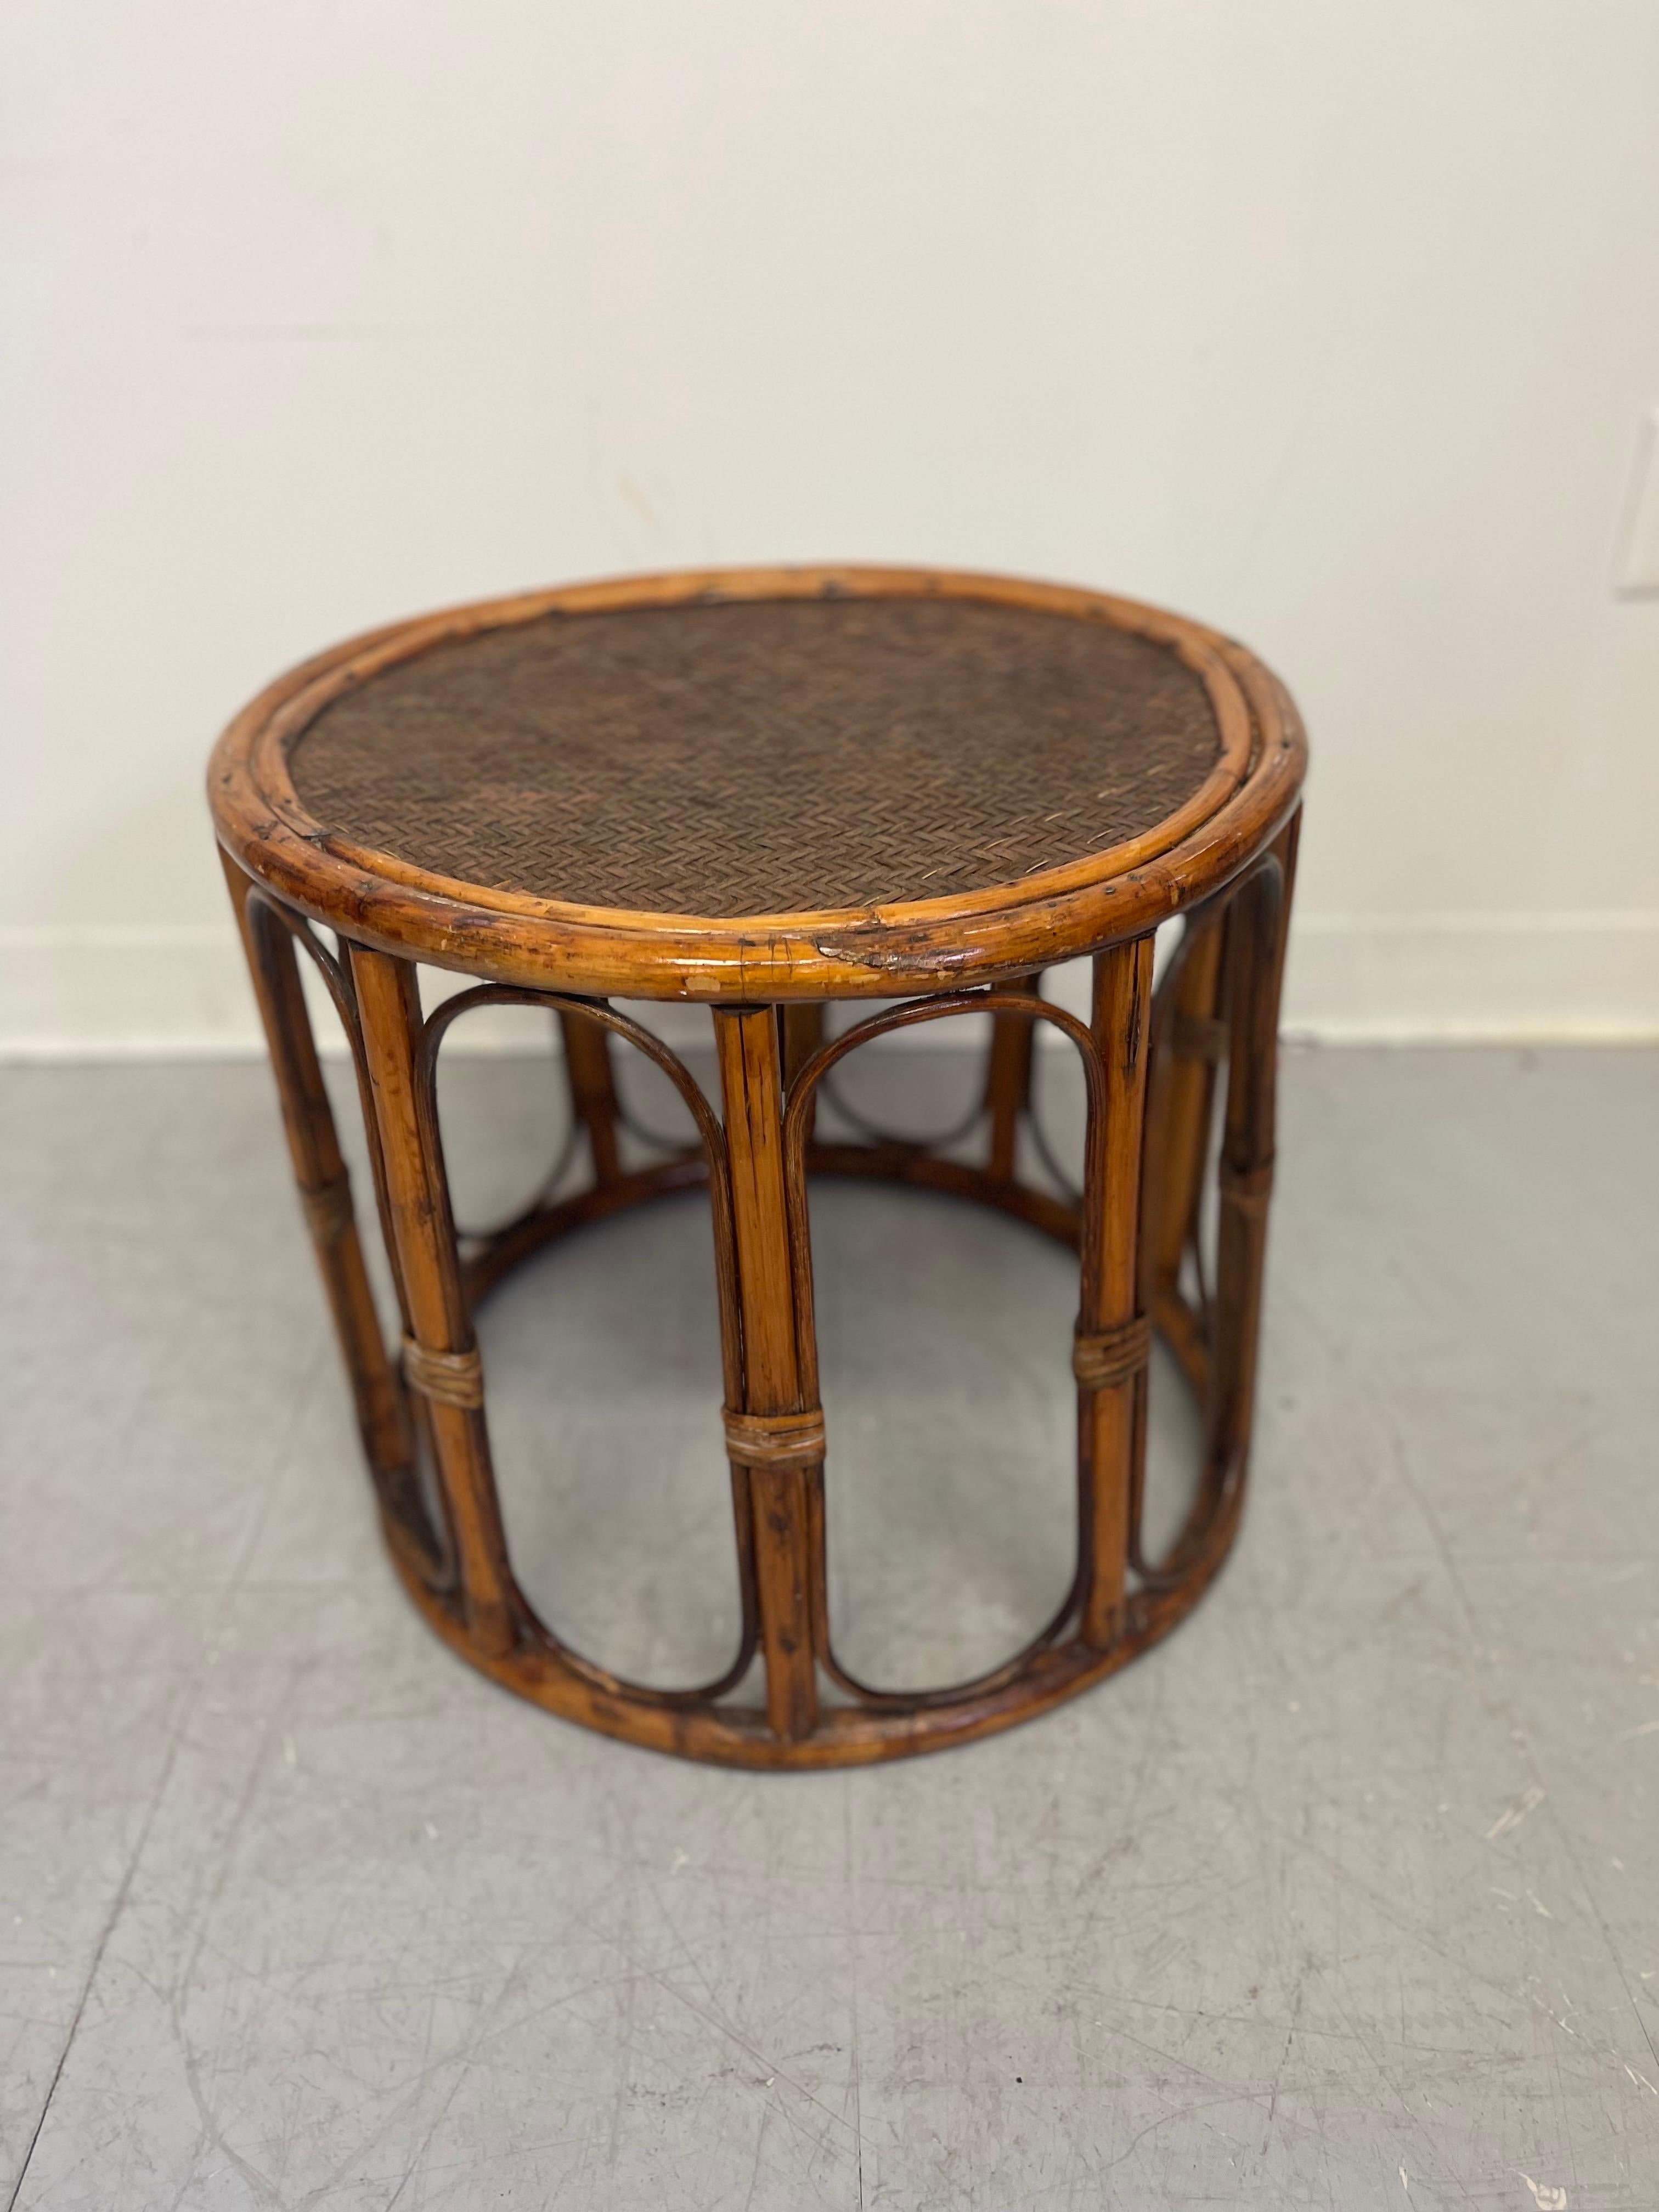 Bentwood Vintage Rattan Caning Circular
Side Table For Sale